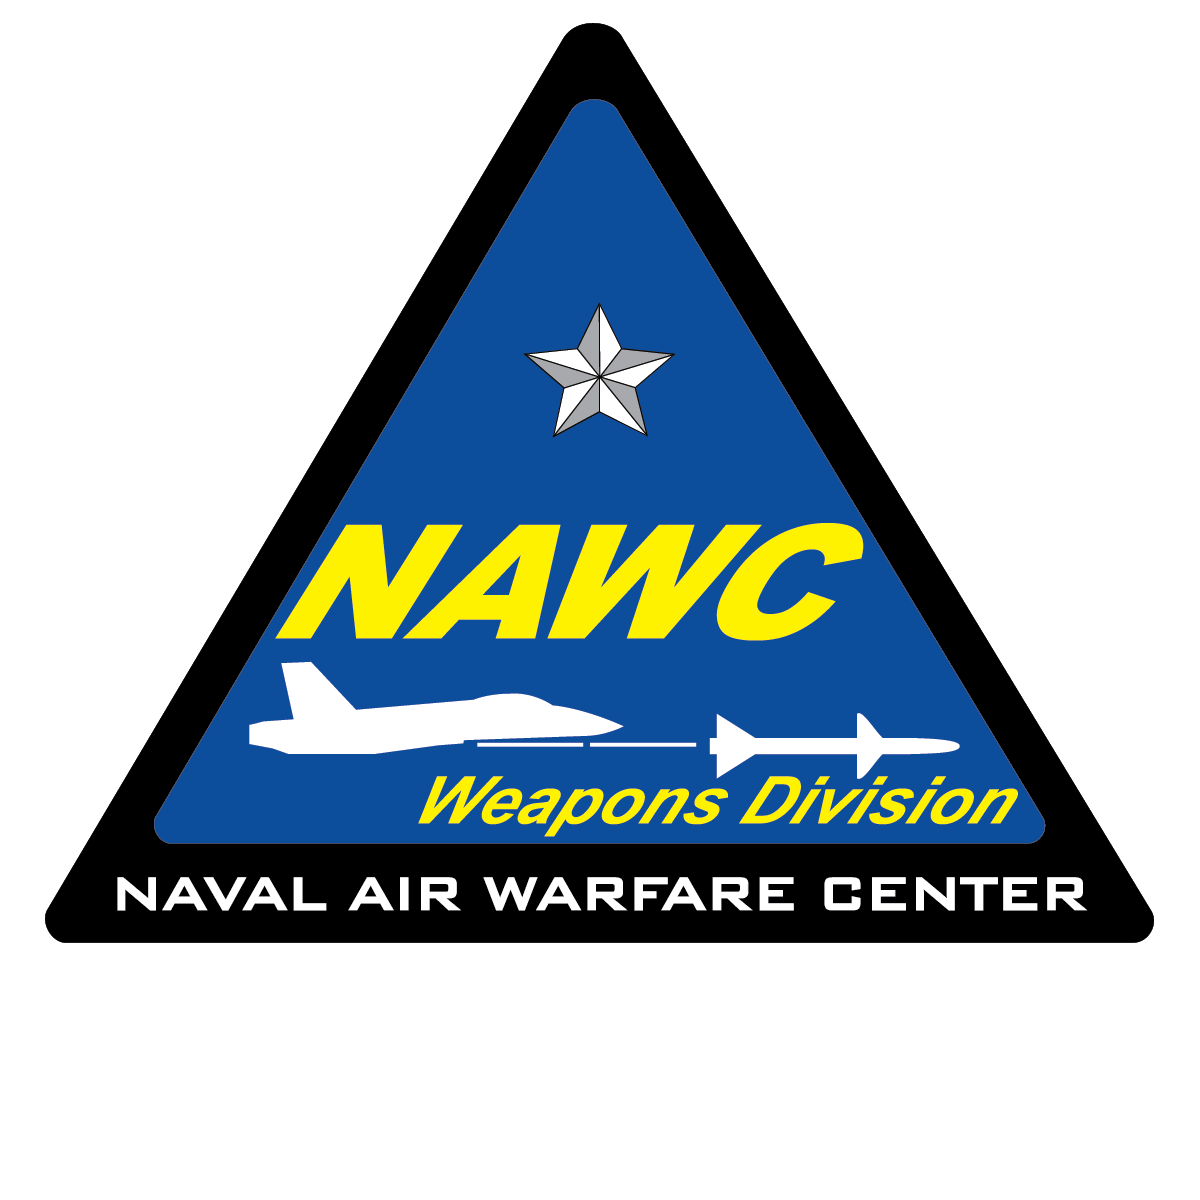 nawc-weapons-division-peiship